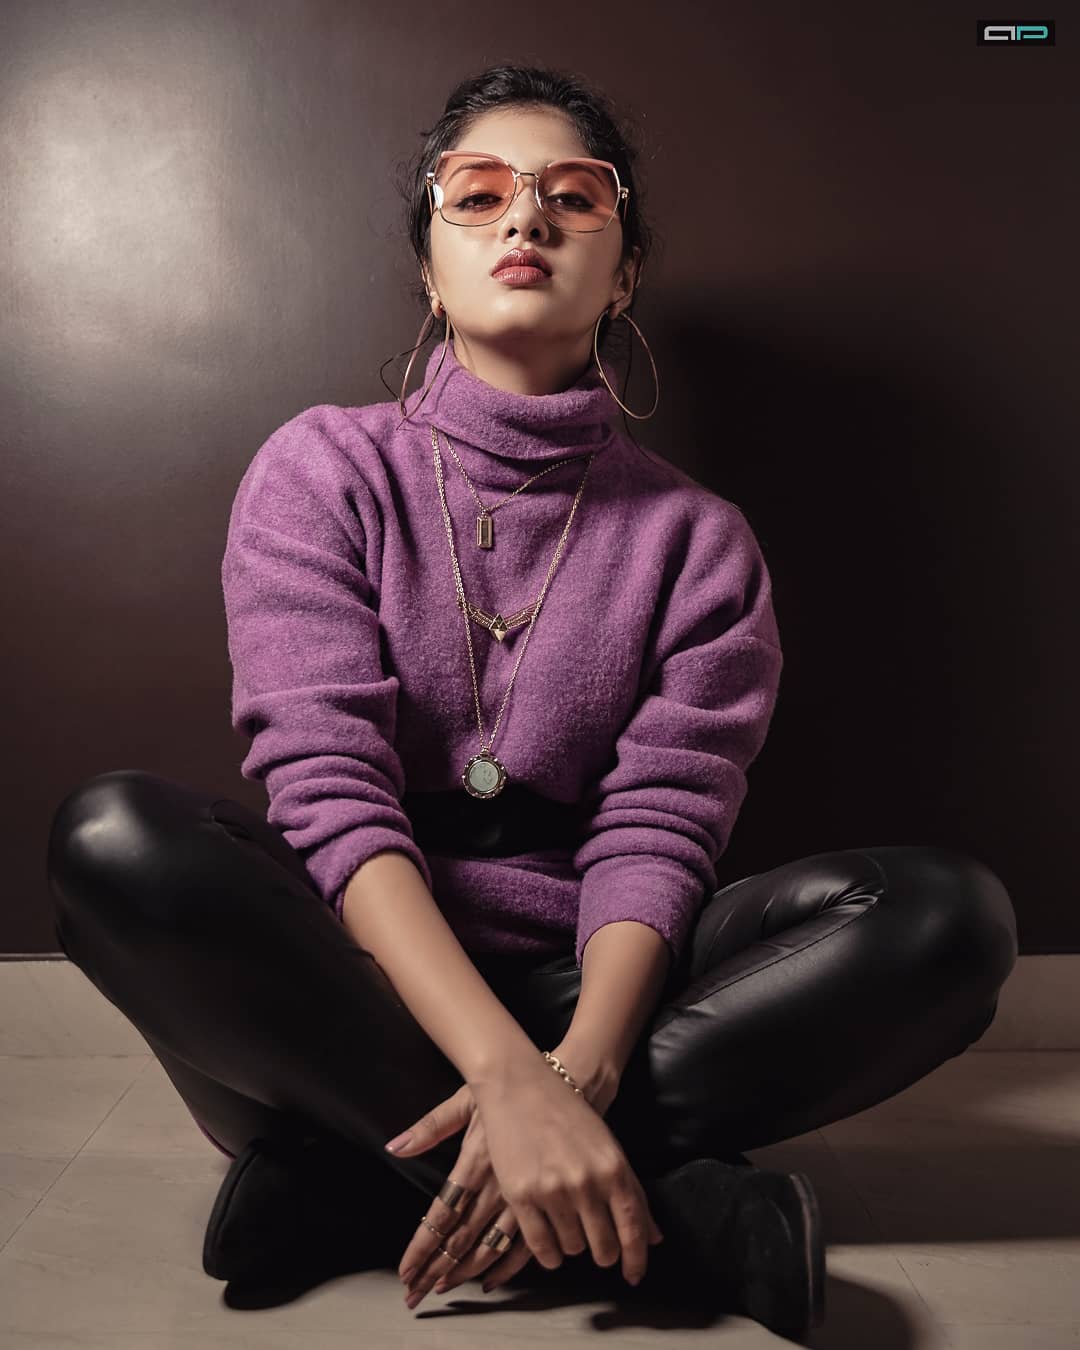 Gayathri Suresh Casual Winter Look In Purple High Neck Pullover With Black Leather Tights Paired With Minimal Jewellery & Chic Sunglasses